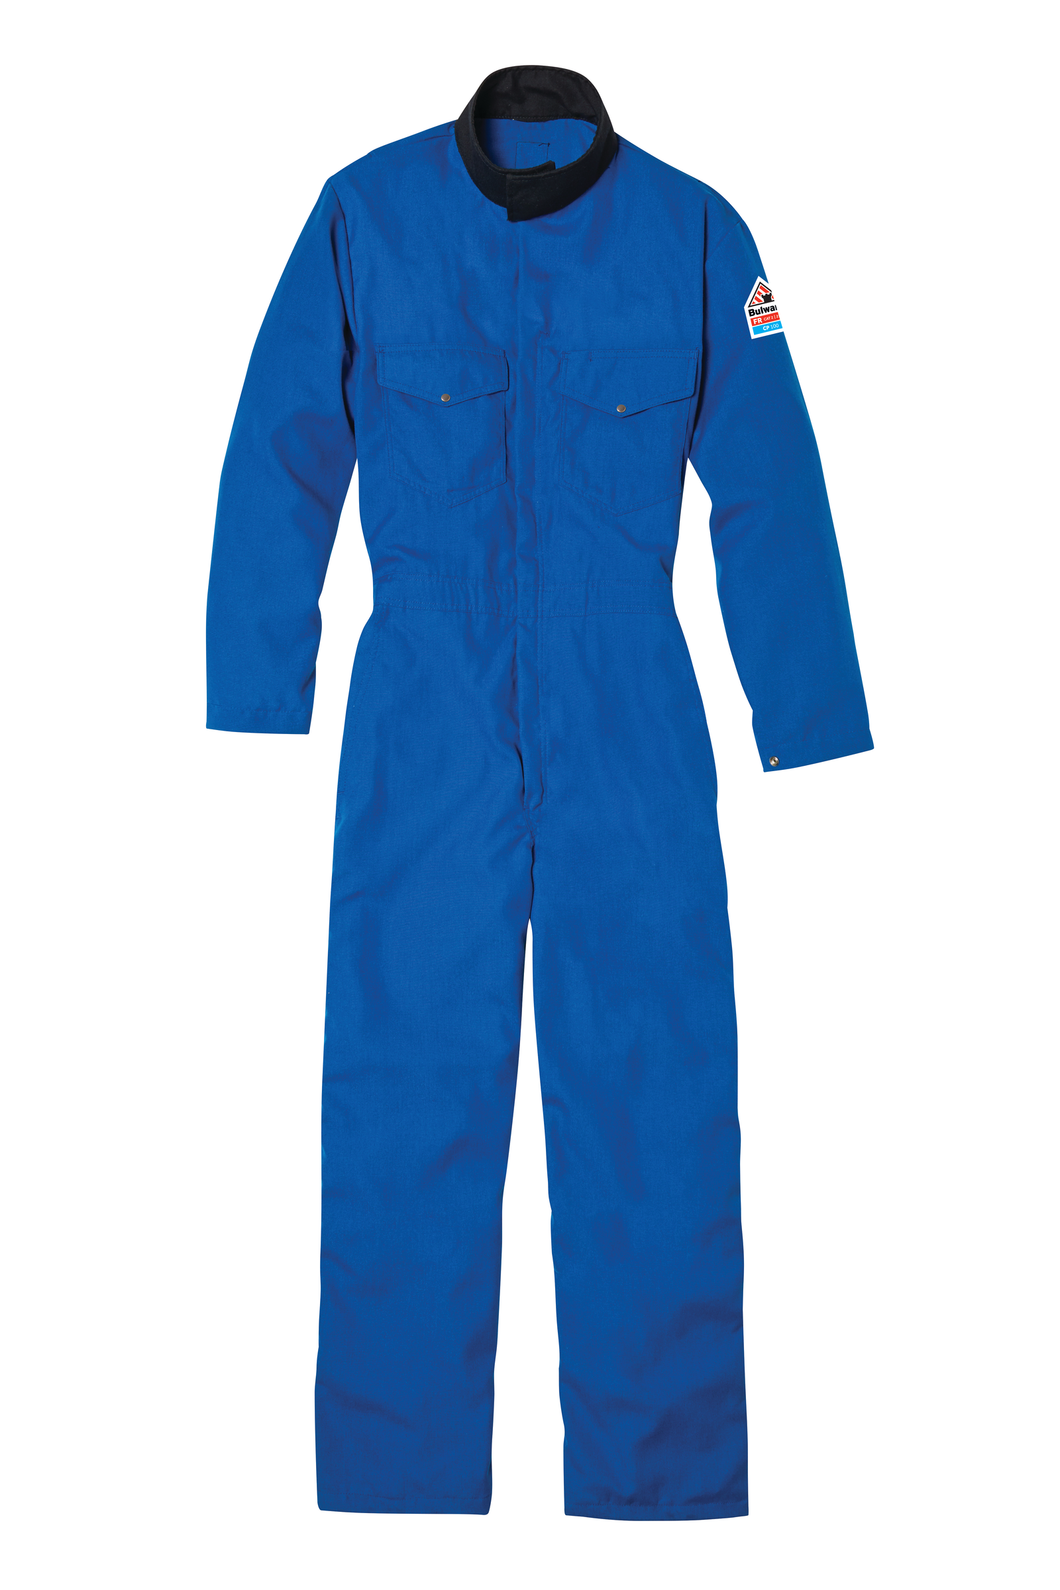 Bulwark 1064 FR-CP Dual Hazard Flame Resistant Coverall with Shield CXP - 4.5 oz. Nomex IIIA (HRC 1 - 5.6 cal)